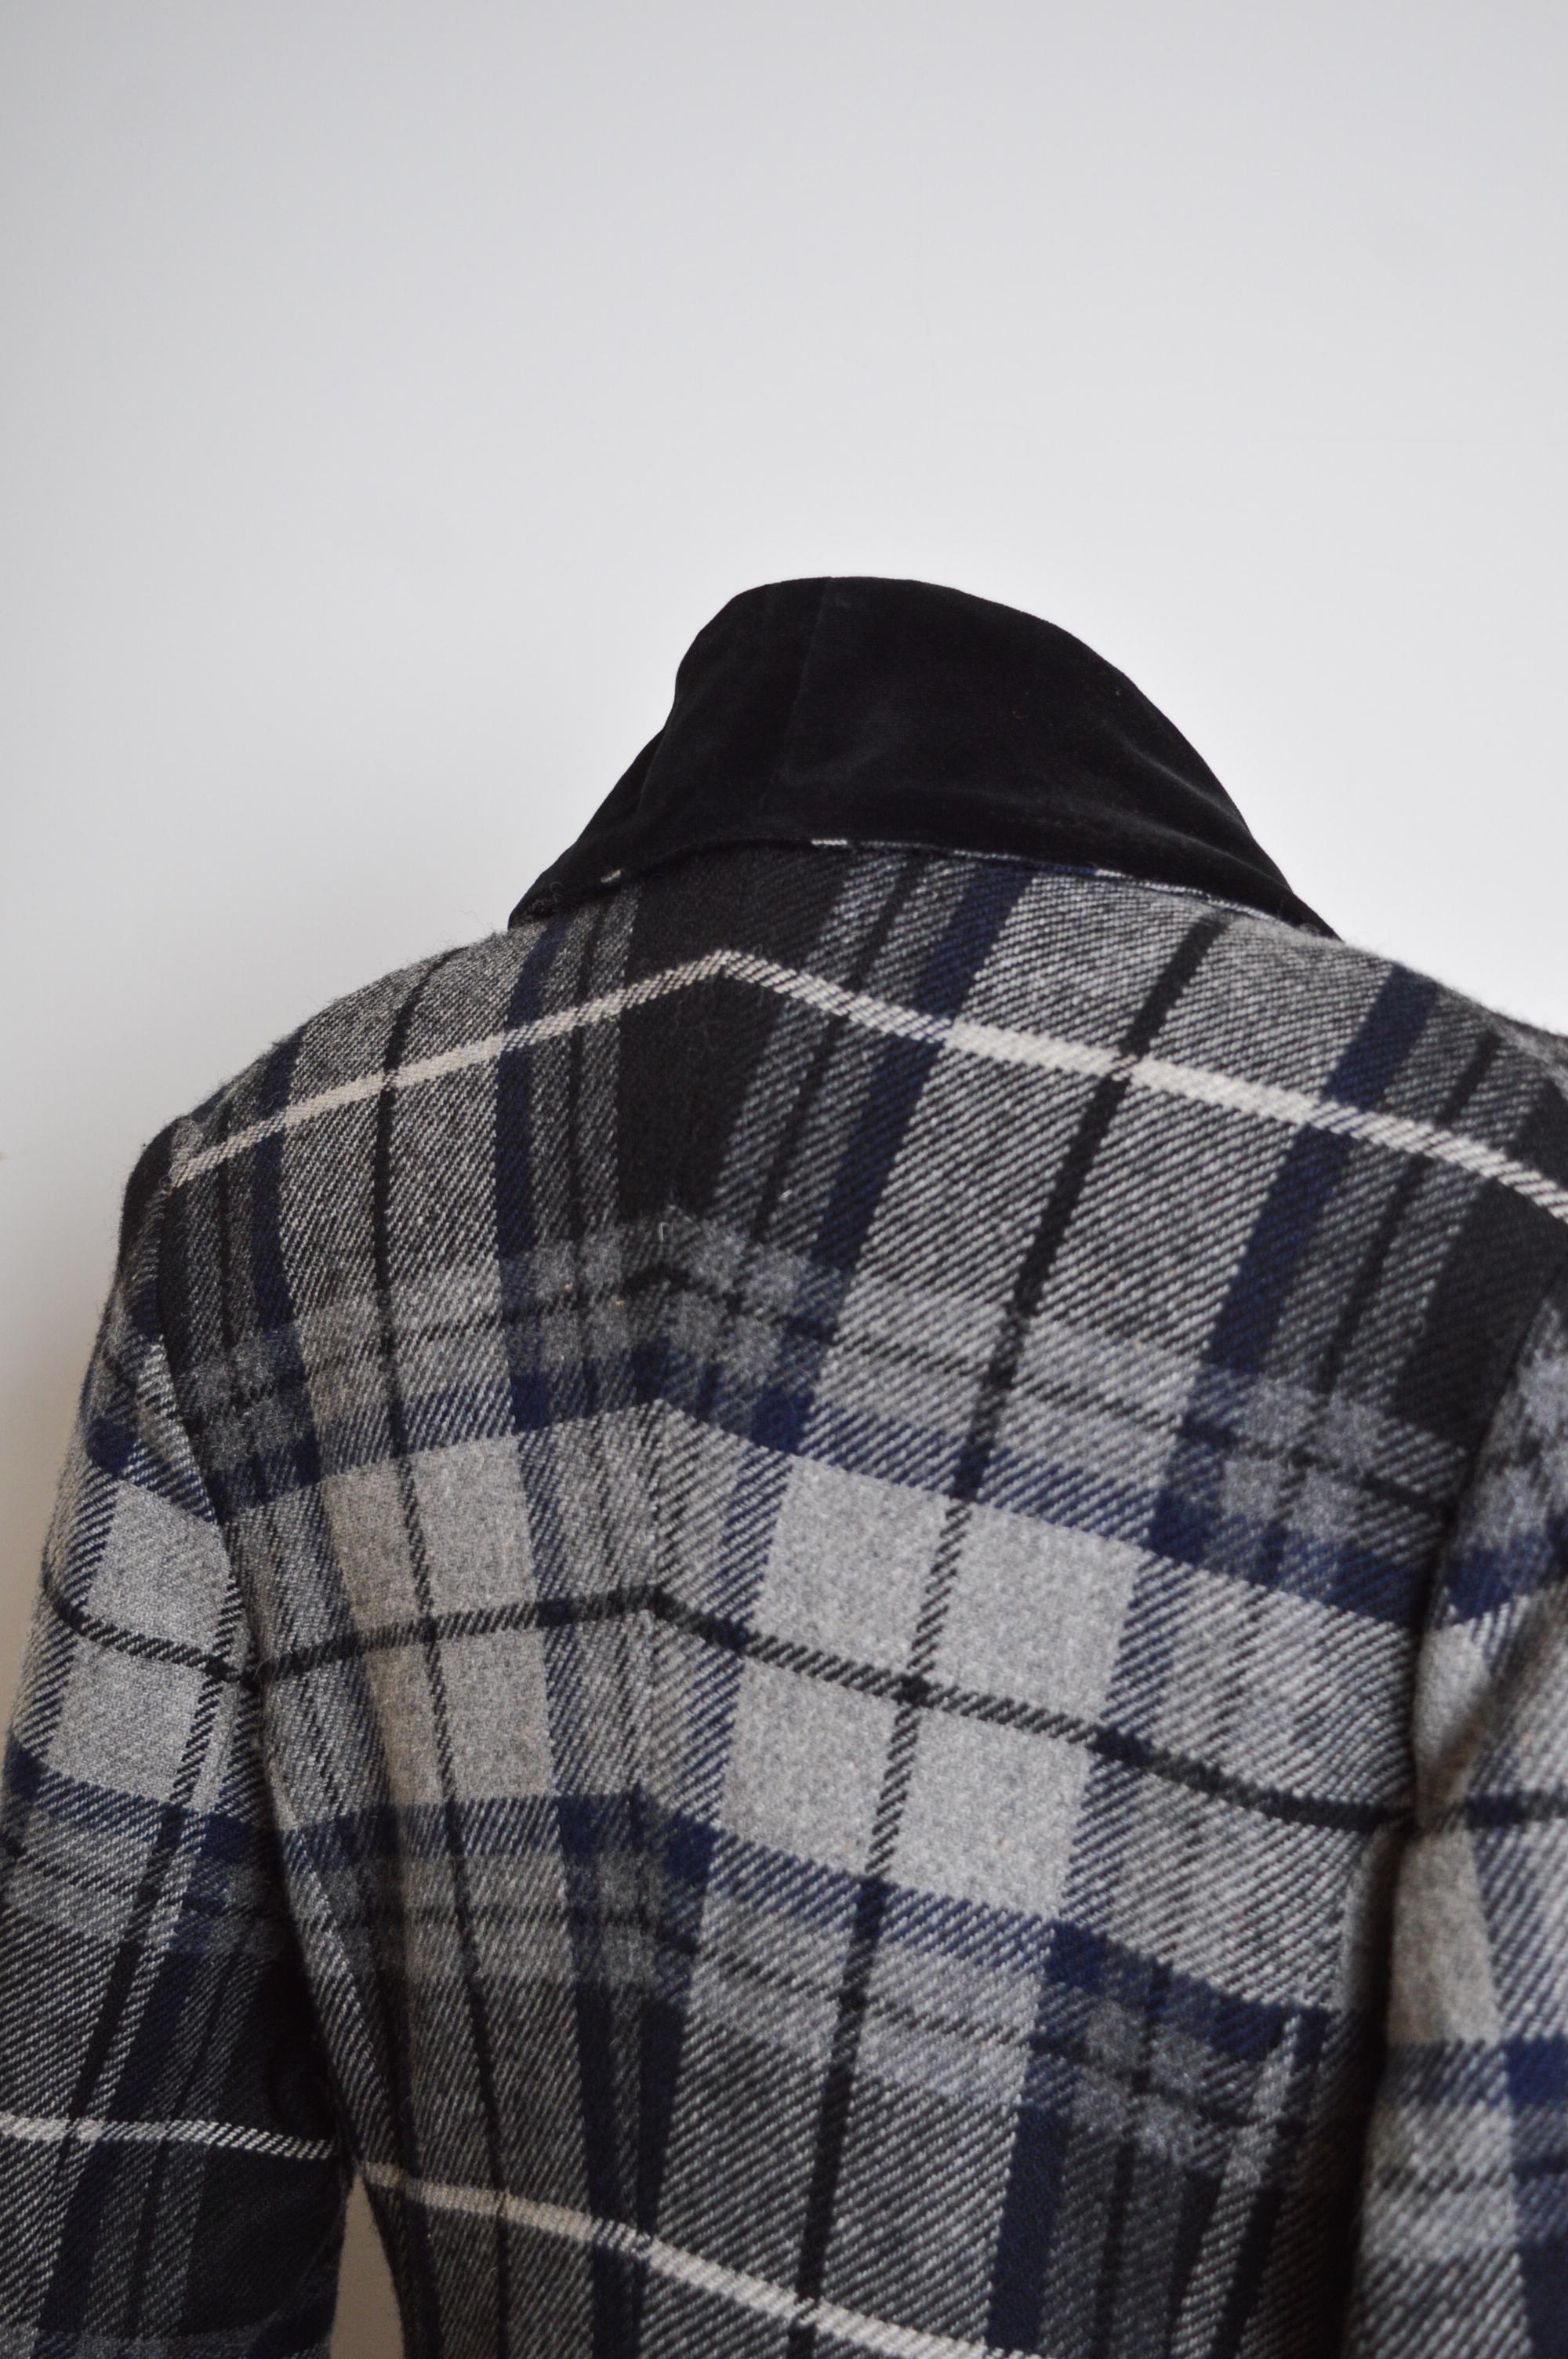 Rare Vivienne Westwood 3 Suisses AW 1995/ 1996 Collab Checked Tartan Wool Coat  For Sale 1